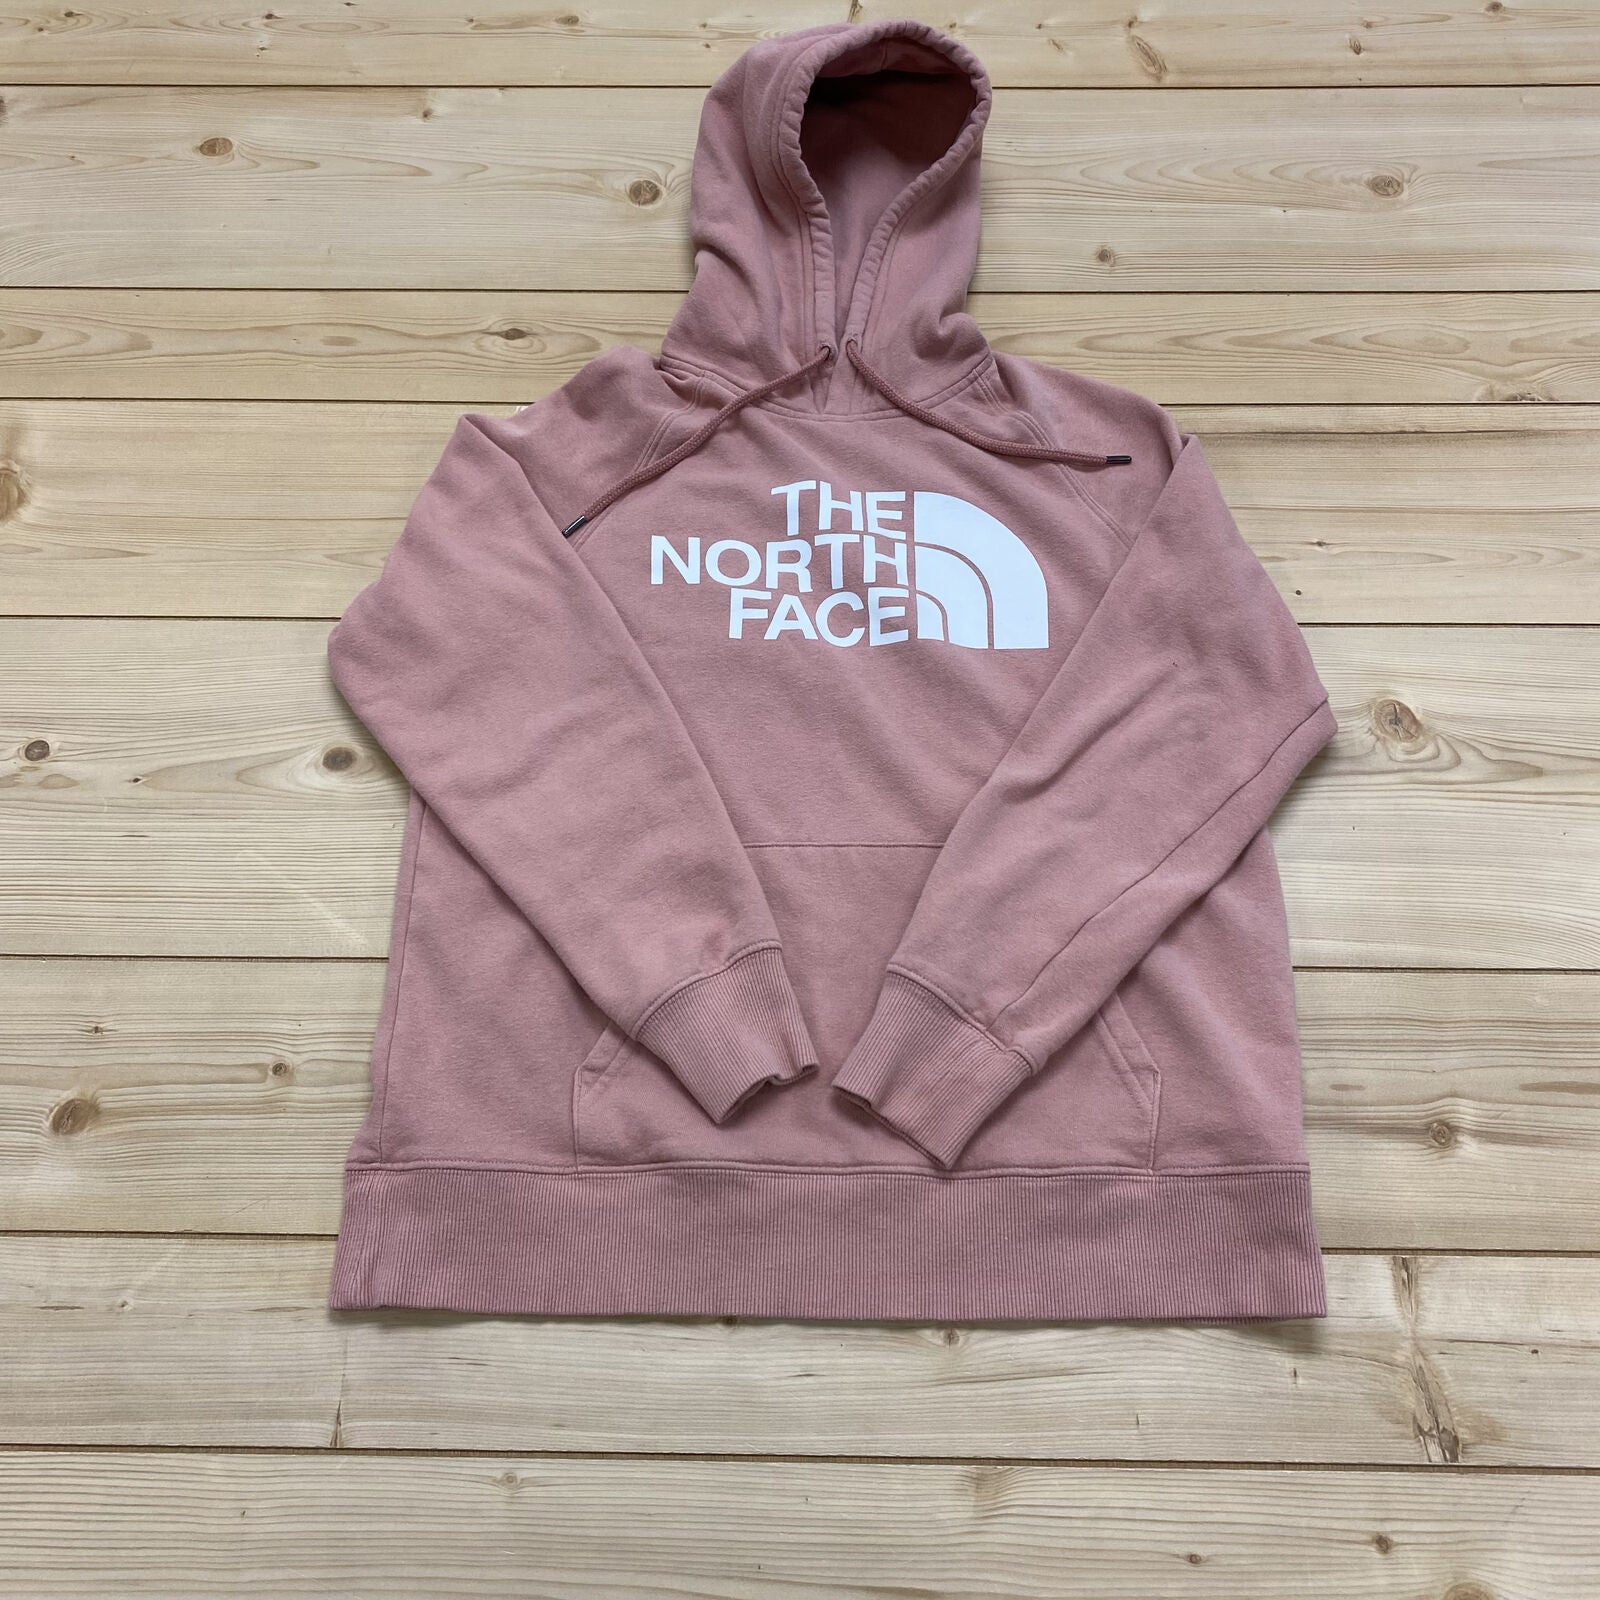 The North Face Pink Long Sleeve Graphic Print Pullover Hoodie Women Size M